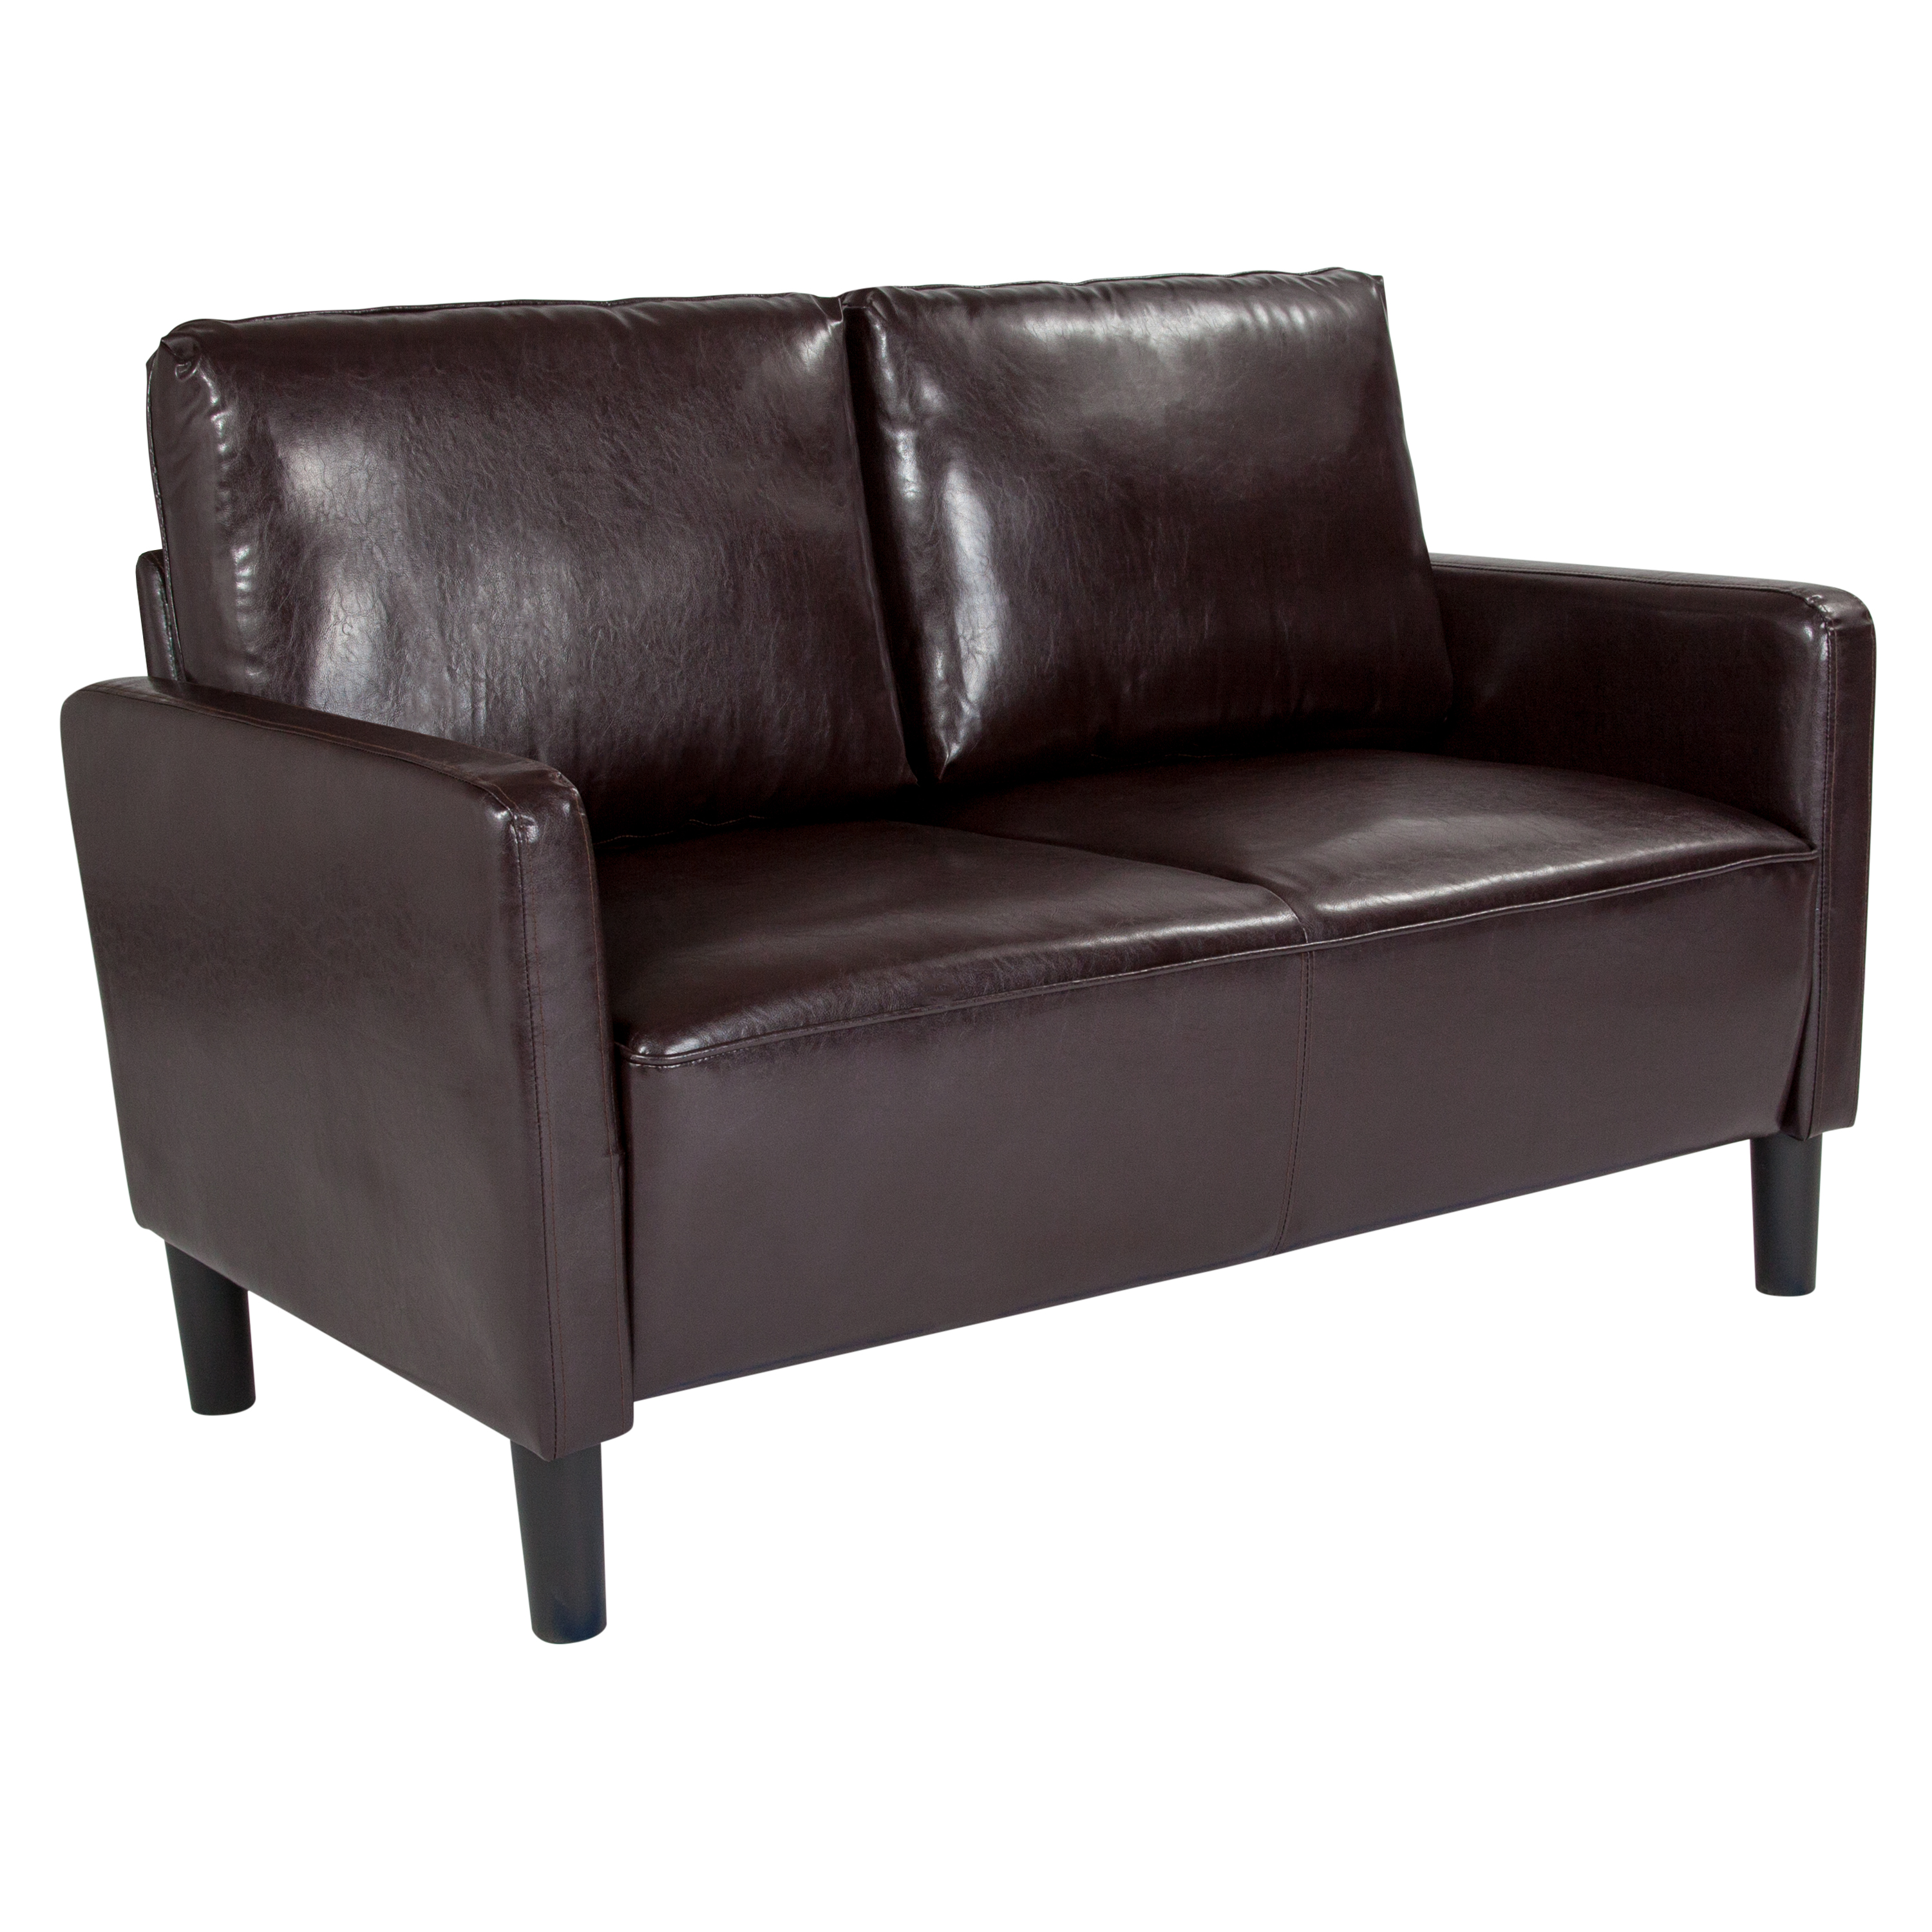 Flash Furniture Washington Park Upholstered Loveseat in Brown LeatherSoft - image 1 of 5